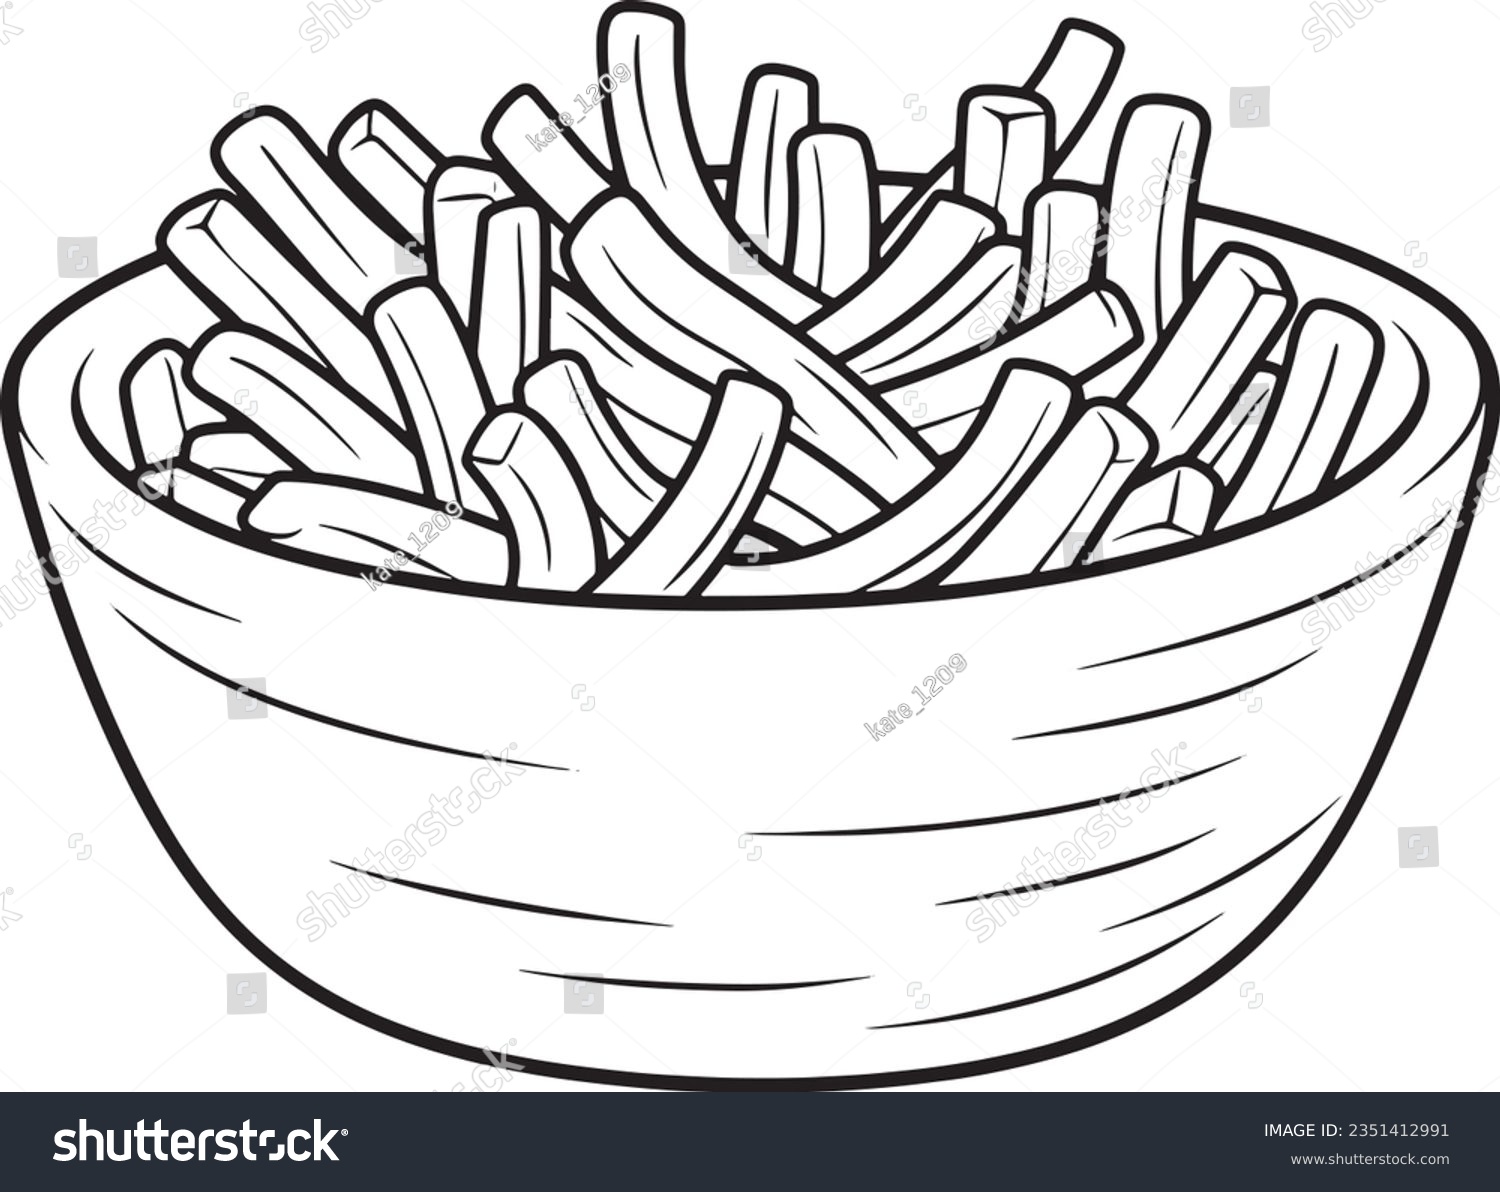 SVG of French fries engraving style, Basic simple Minimalist vector SVG logo graphic, isolated on white background, children's coloring page, outline art, thick crisp lines, black and whi svg